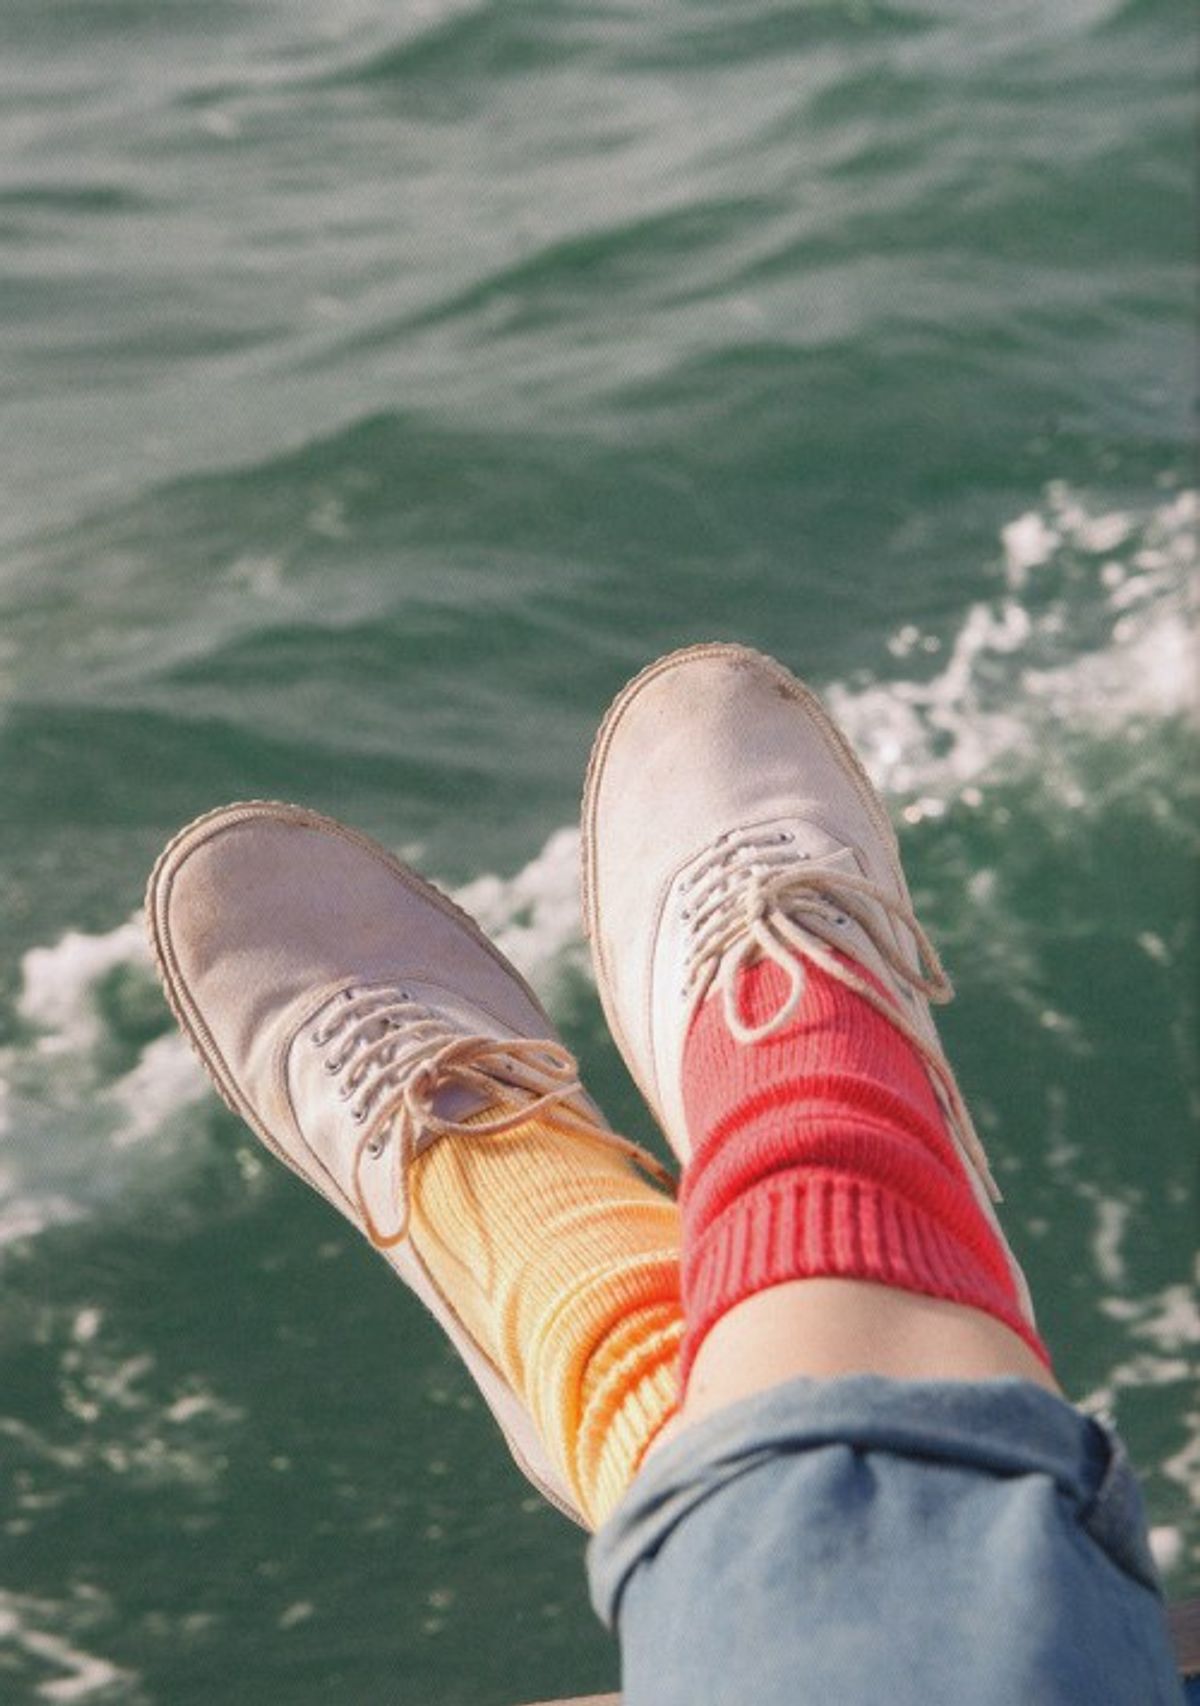 Why You Should Date The Girl With The Mismatched Socks